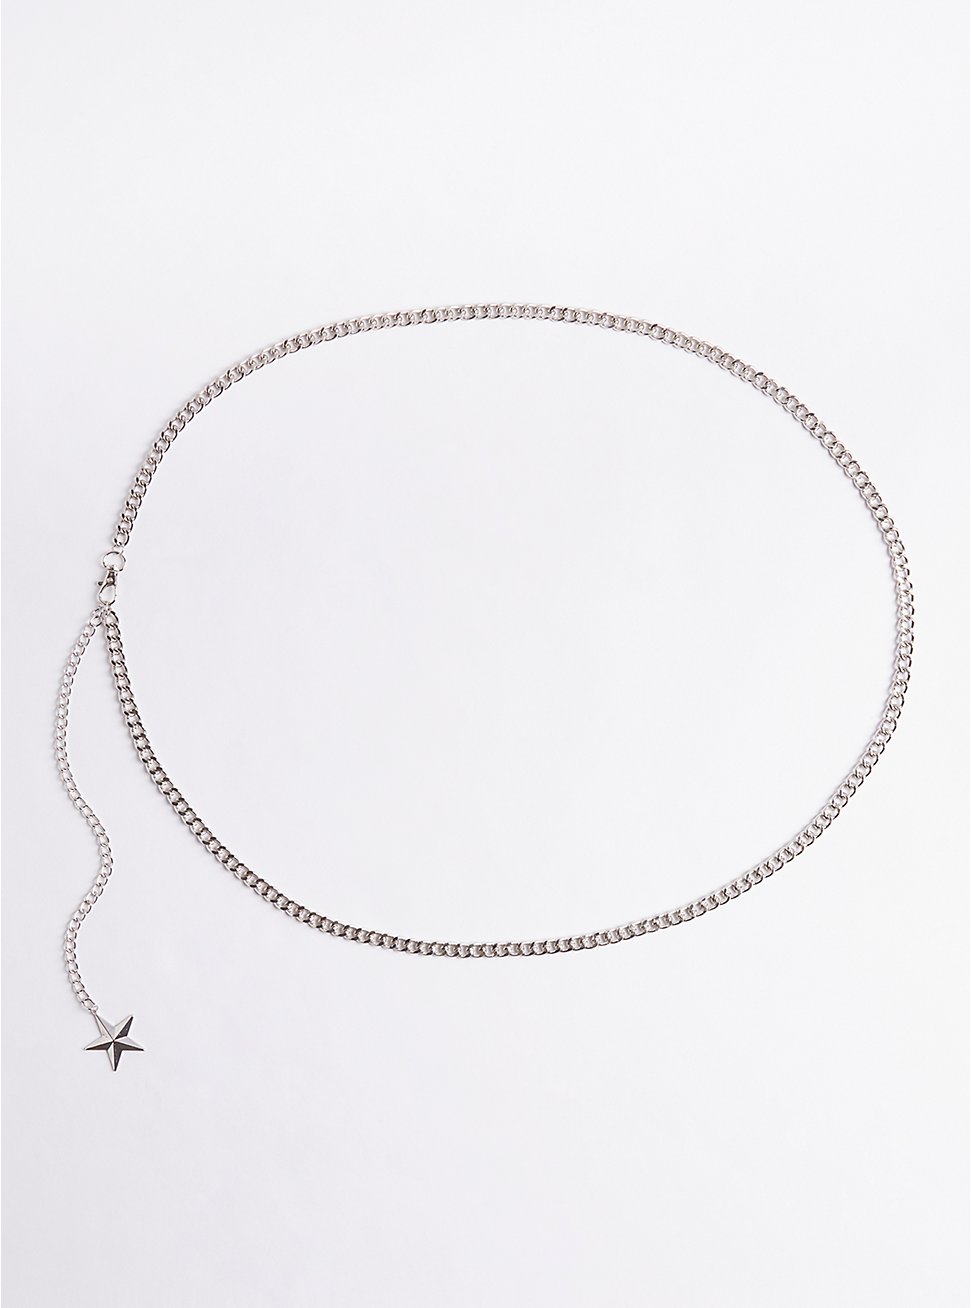 Plus Size Chain Belt with Star - Silver Tone, SILVER, hi-res